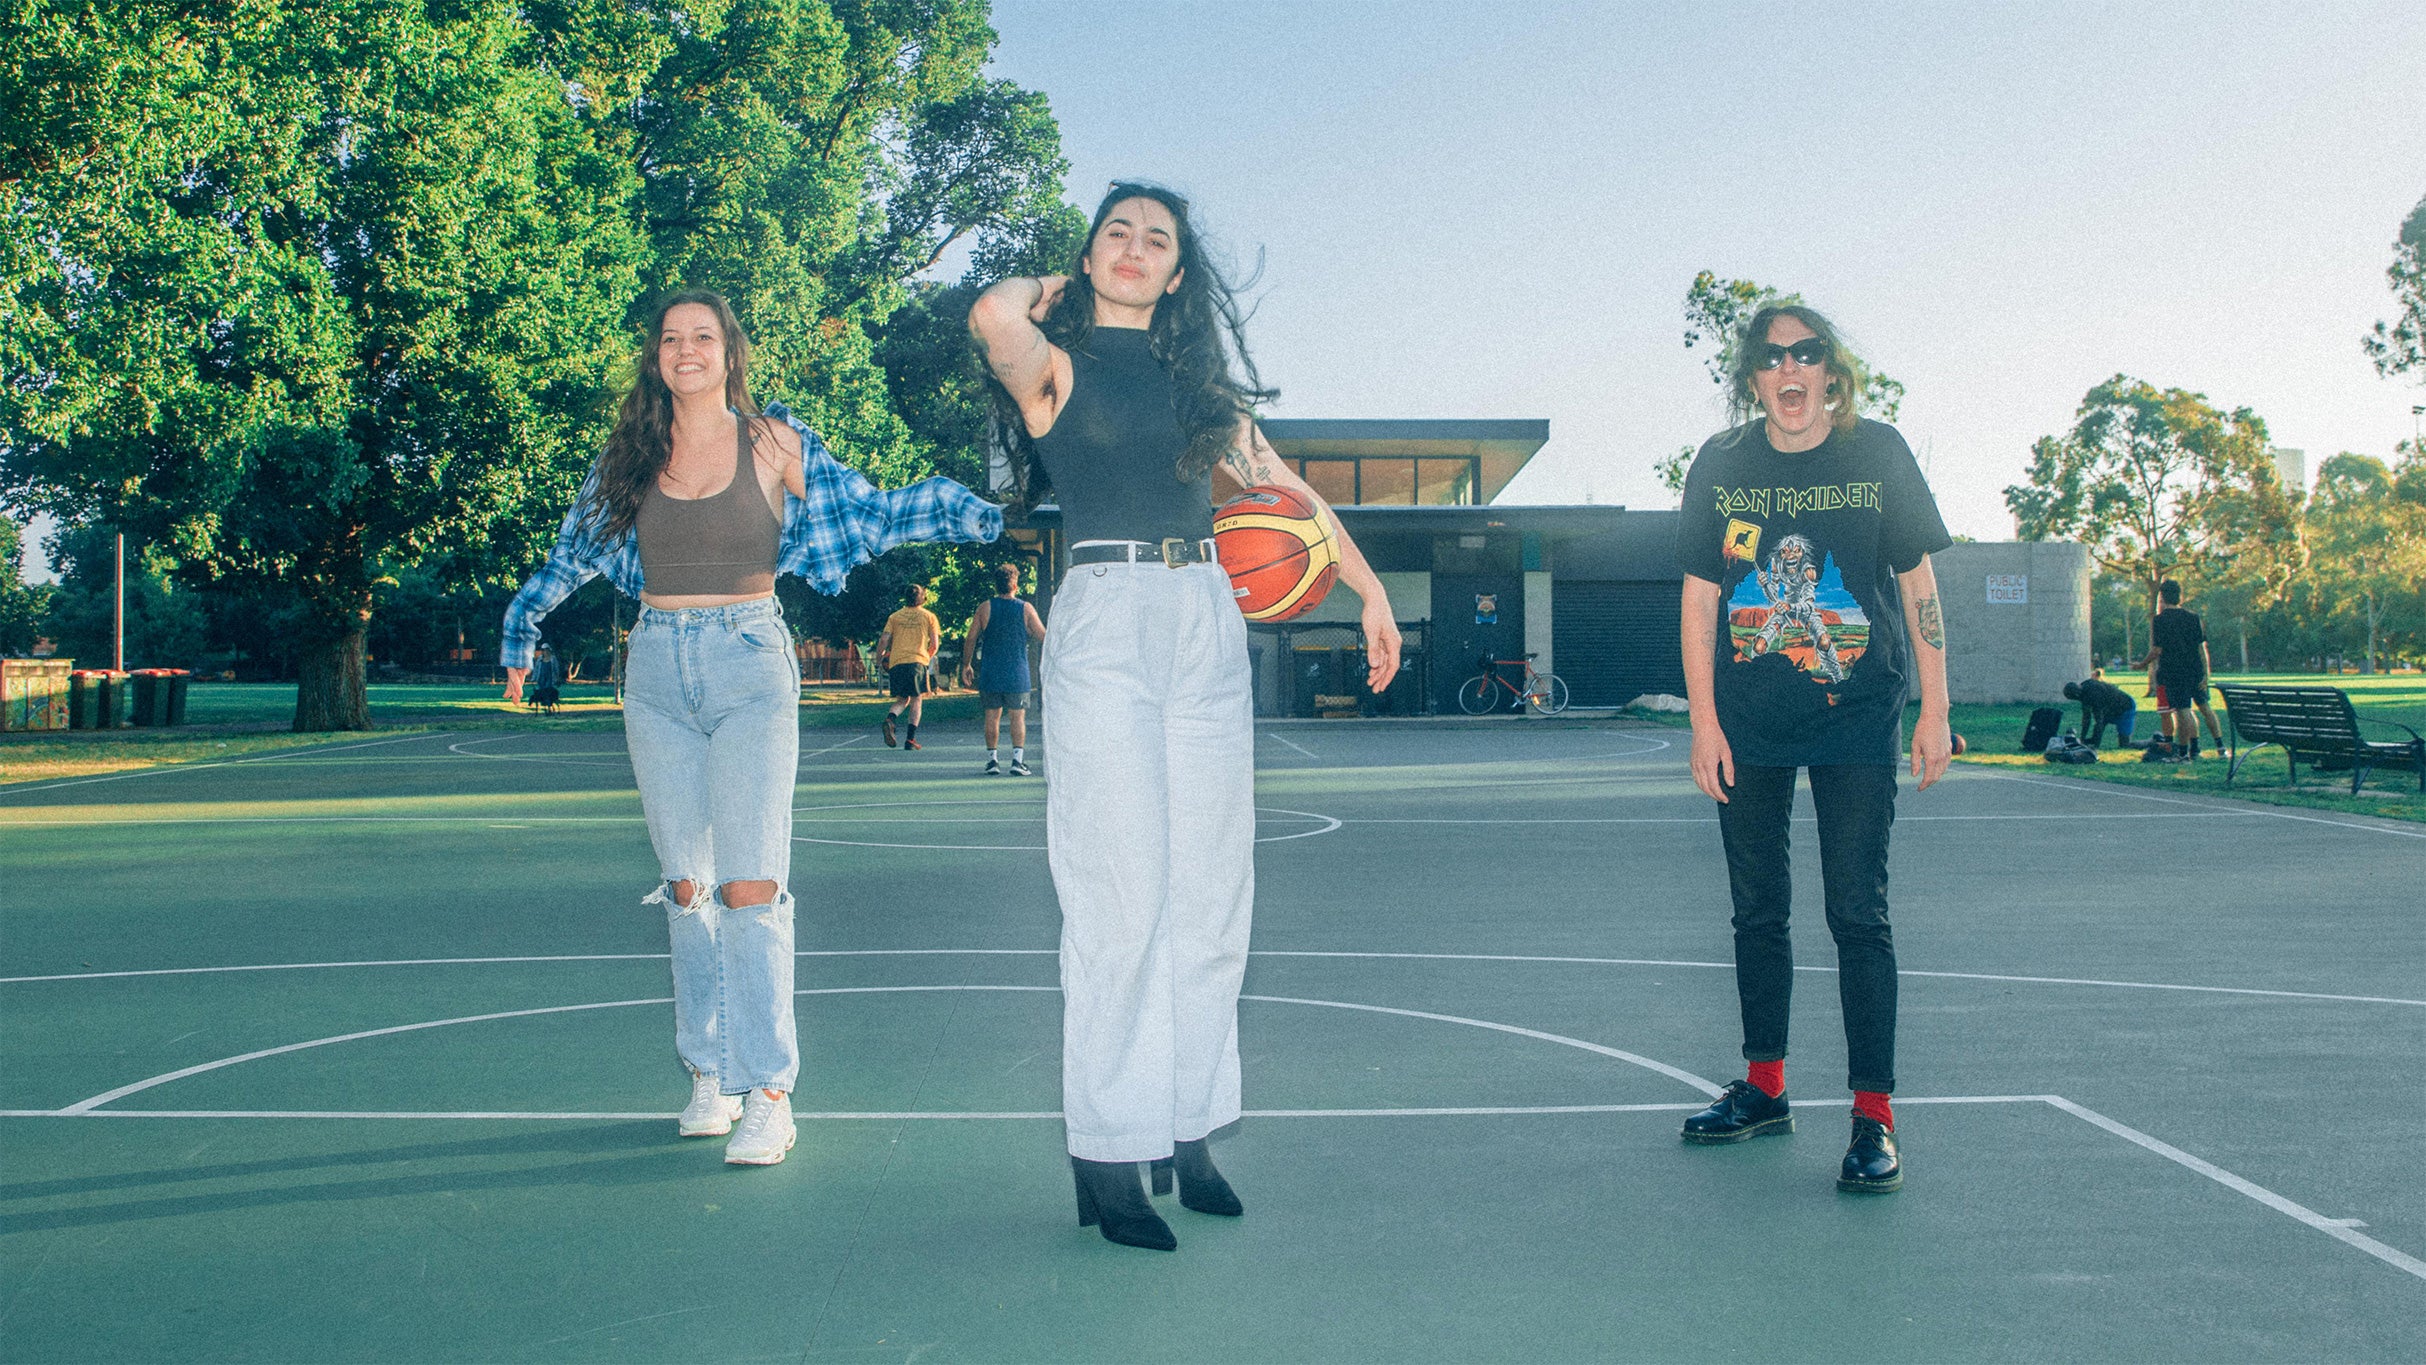 Camp Cope in Columbus promo photo for Seated presale offer code